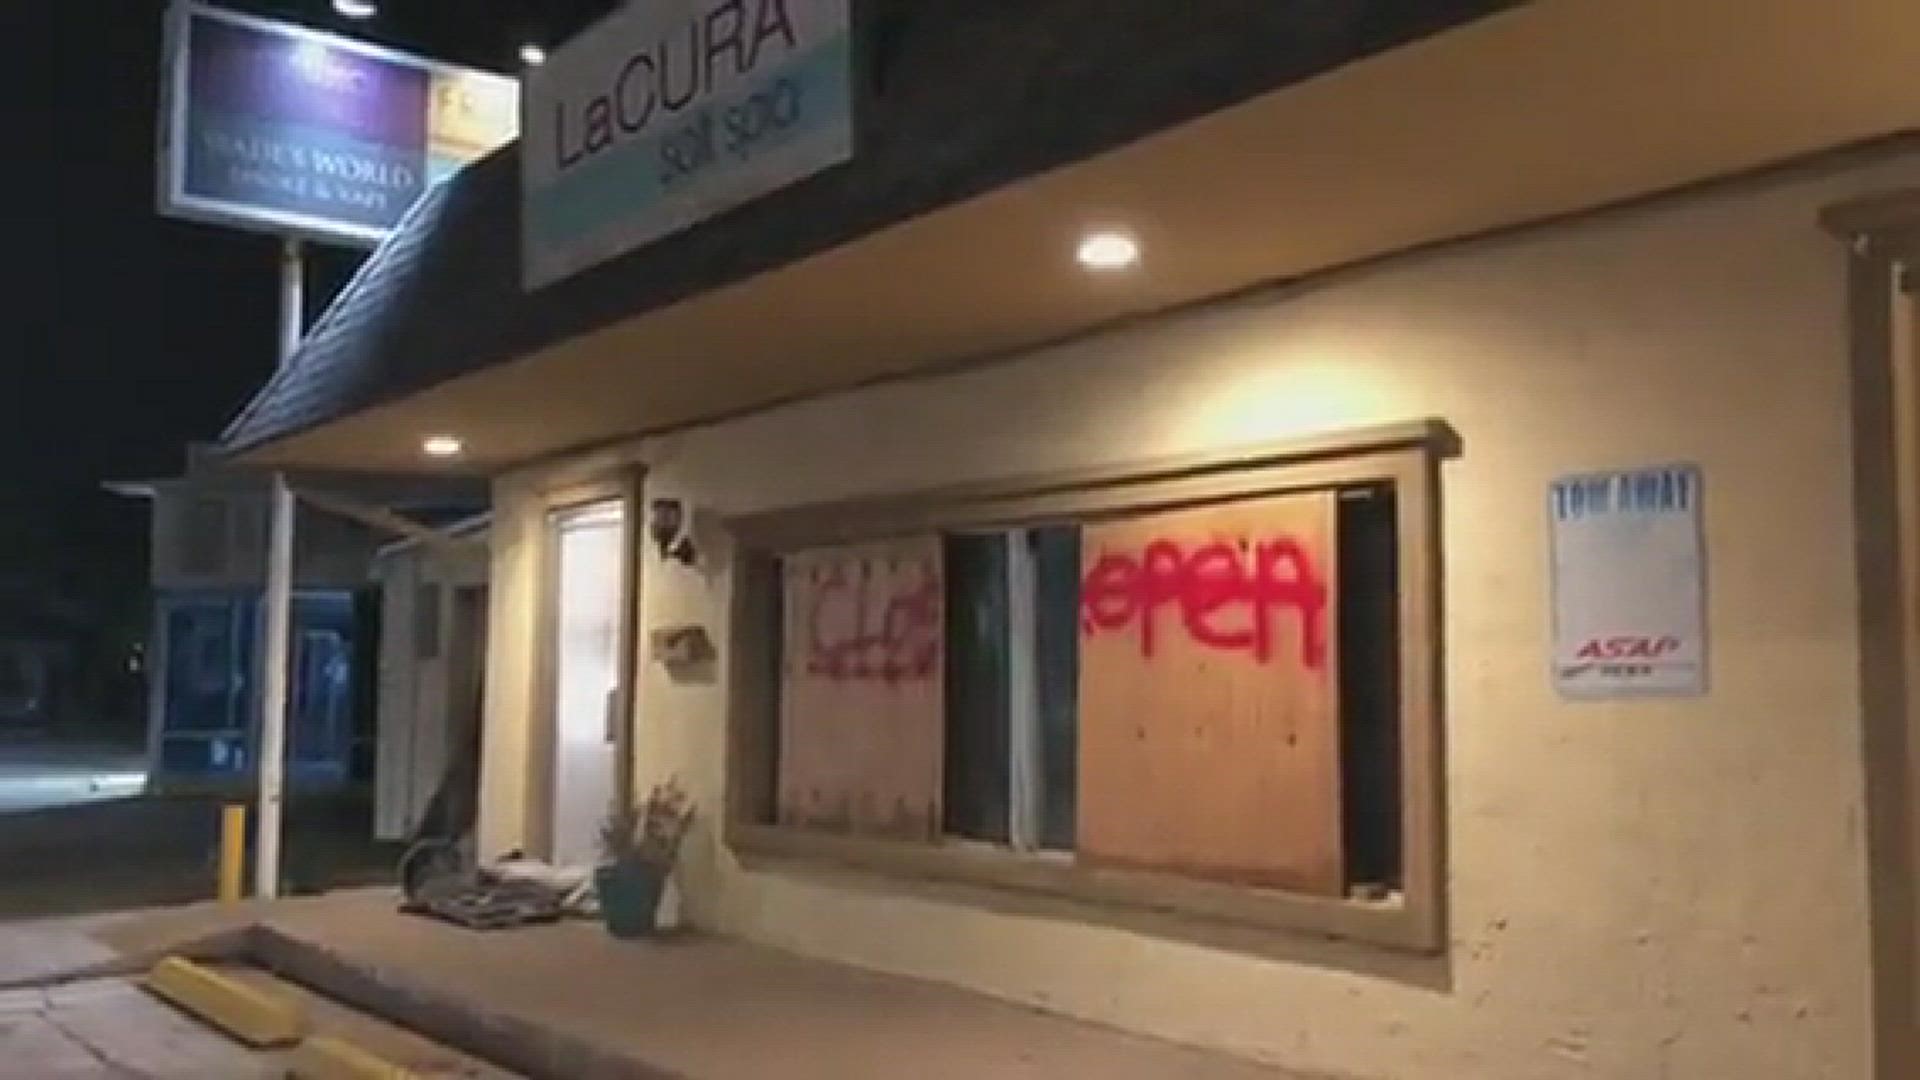 Flood water mark visible on boarded up businesses on A1A
Credit: Renata Di Gregorio